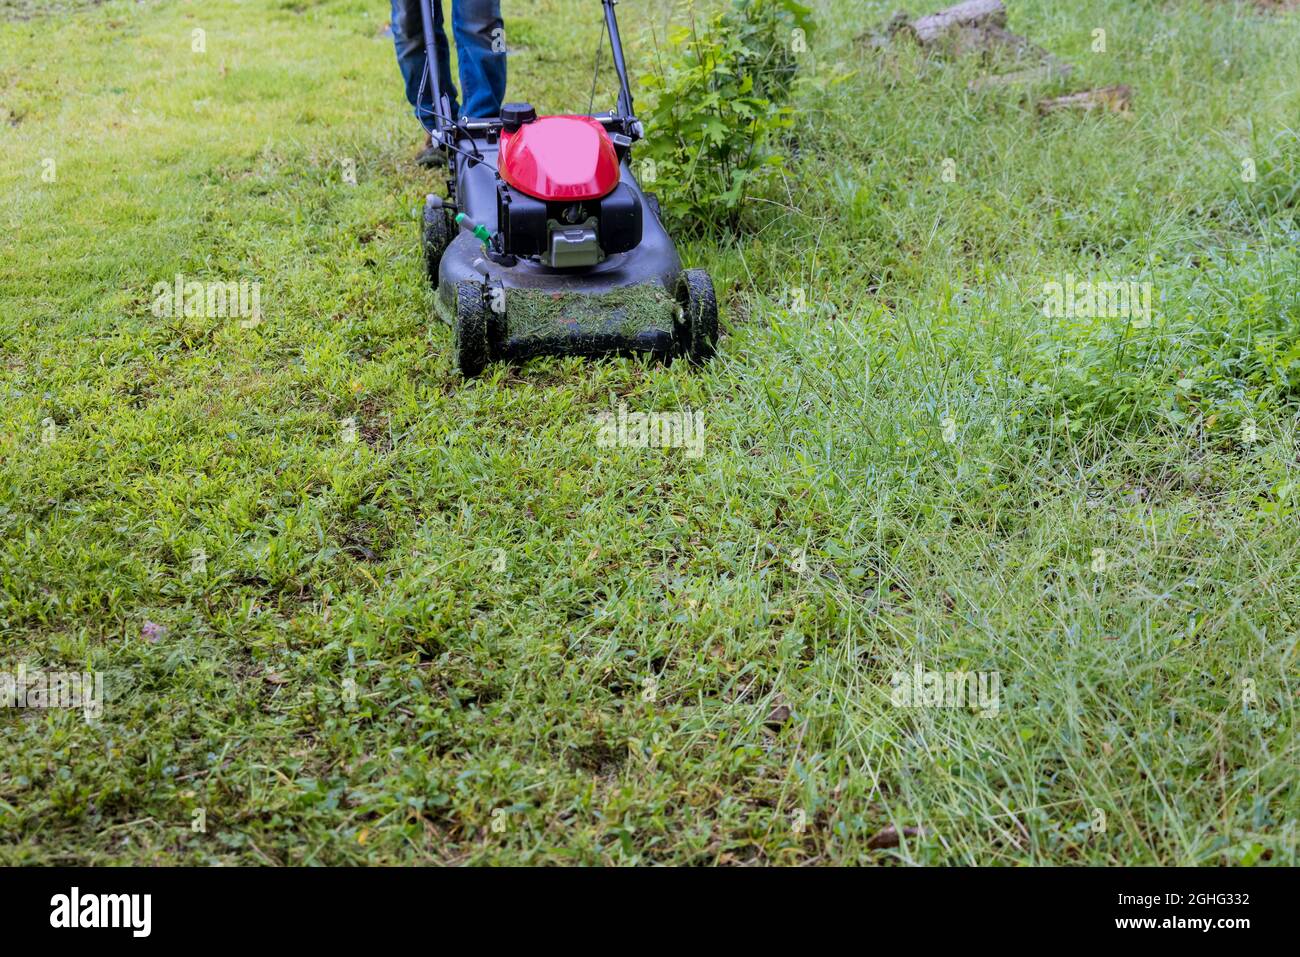 Utility worker in lawn mower gardener cutting the grass ride-on lawnmower Stock Photo